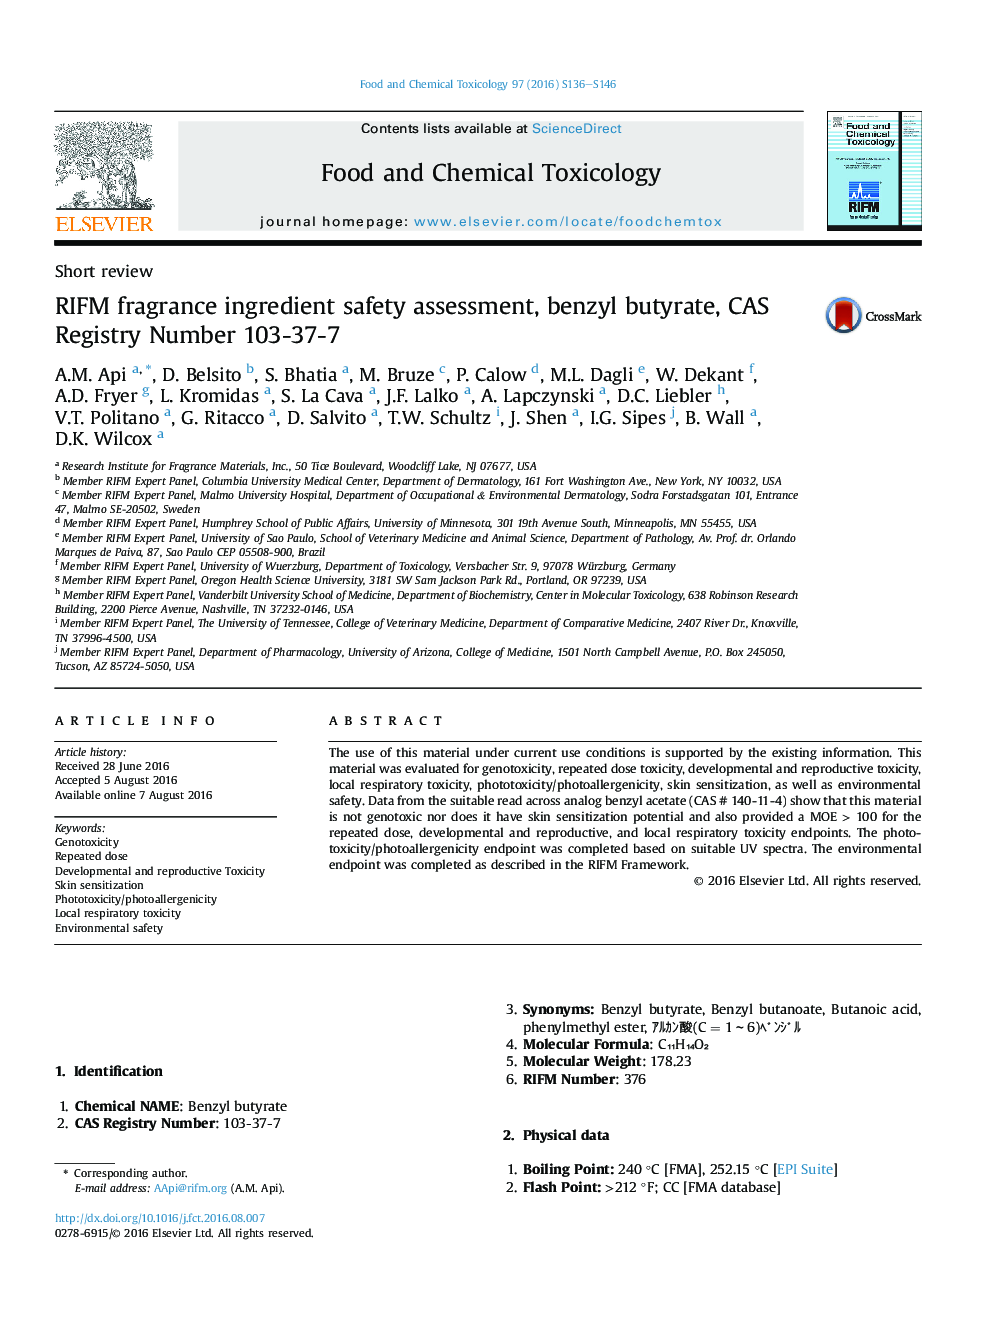 RIFM fragrance ingredient safety assessment, benzyl butyrate, CAS Registry Number 103-37-7